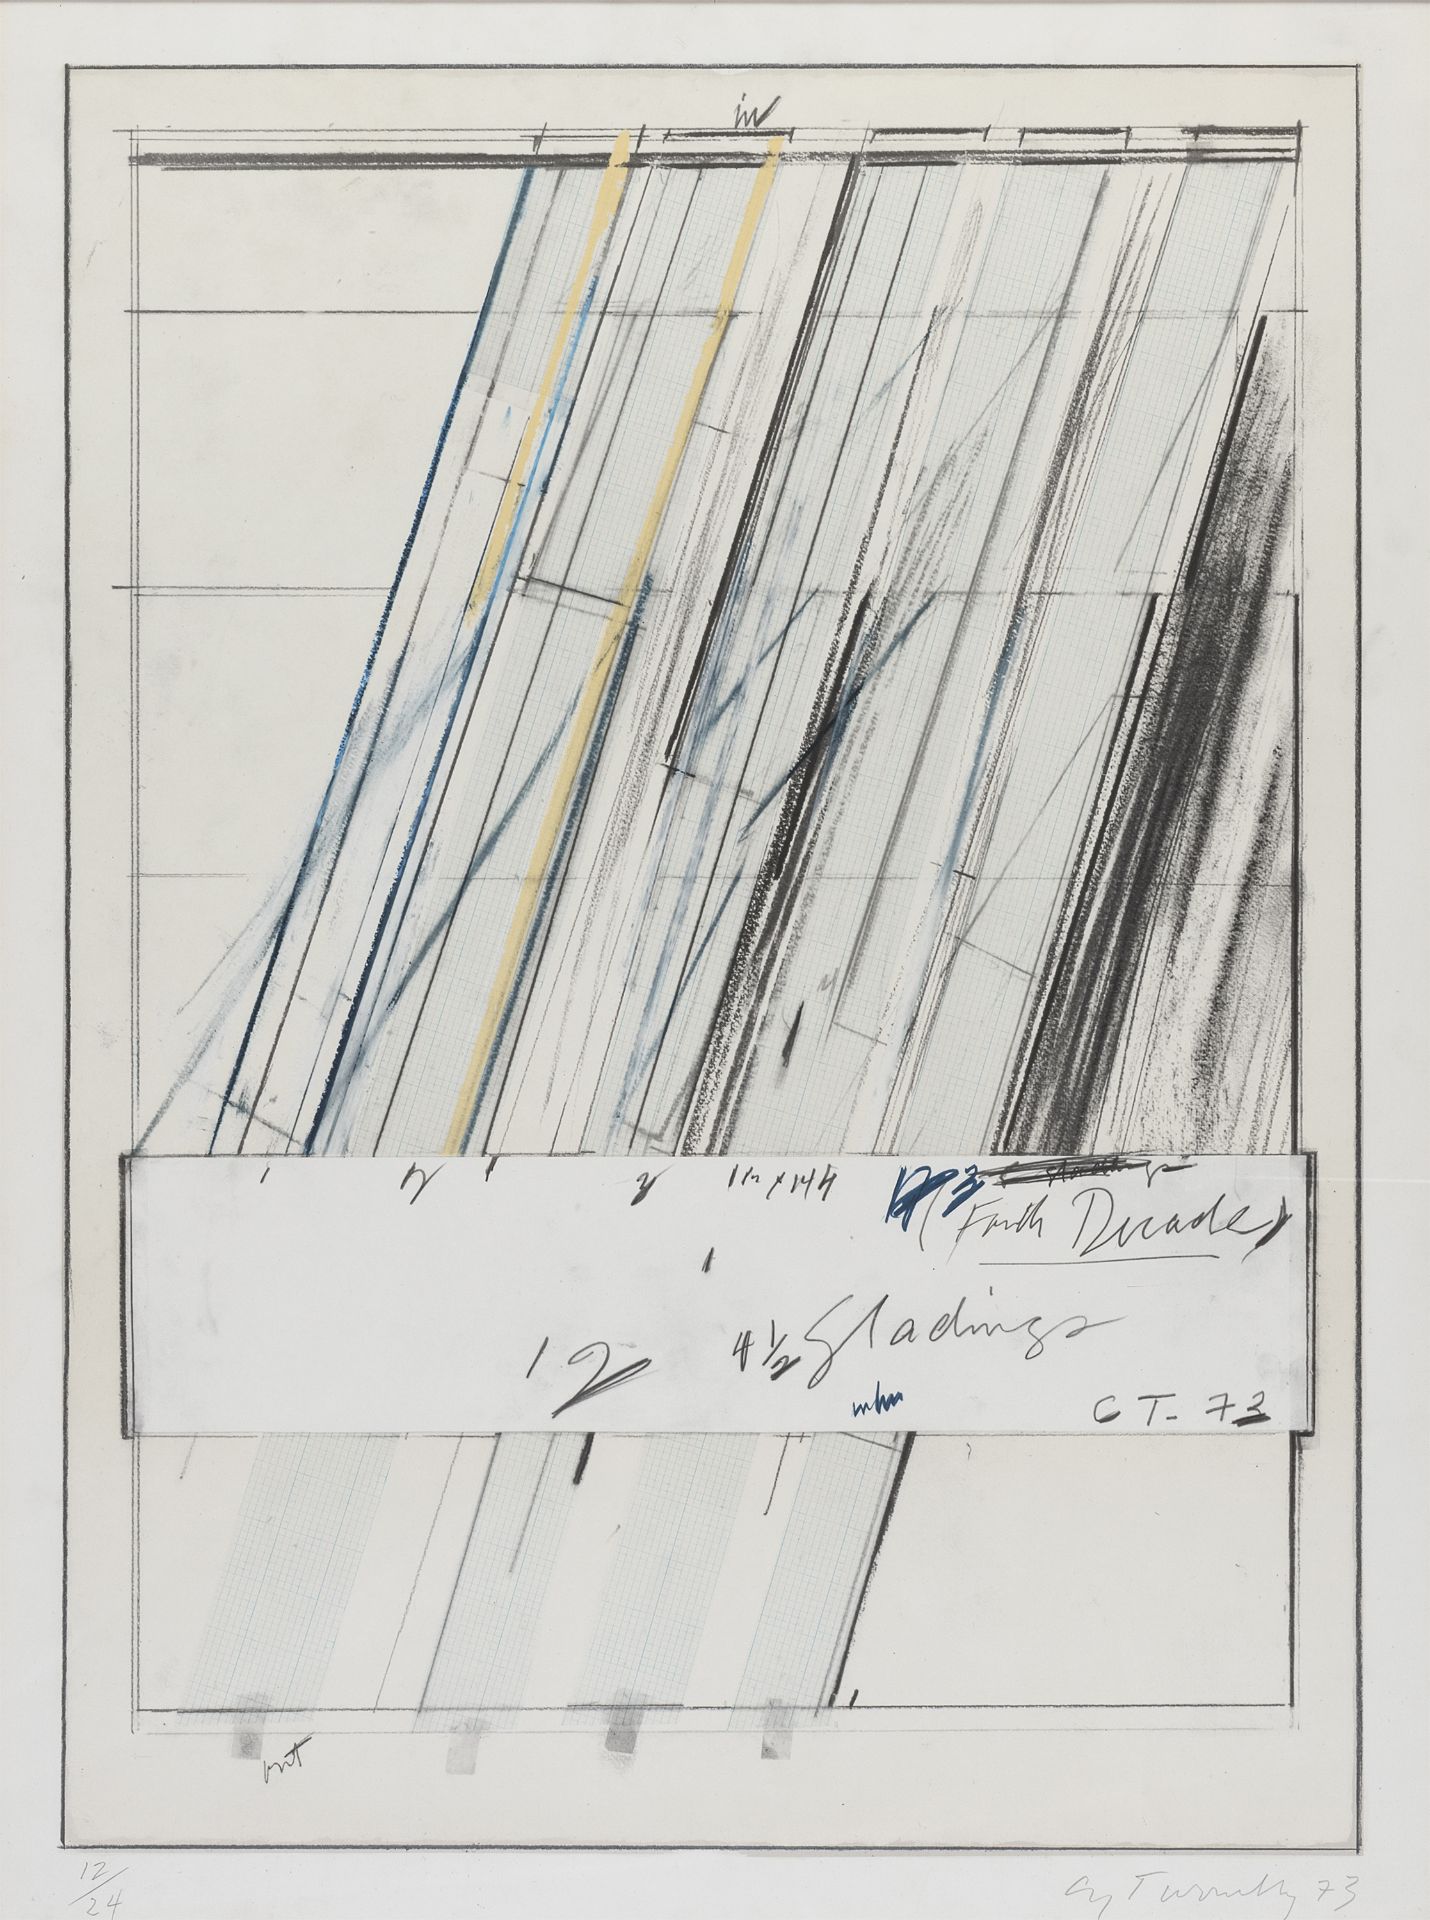 LITOGRAPH AND PASTELS BY CY TWOMBLY